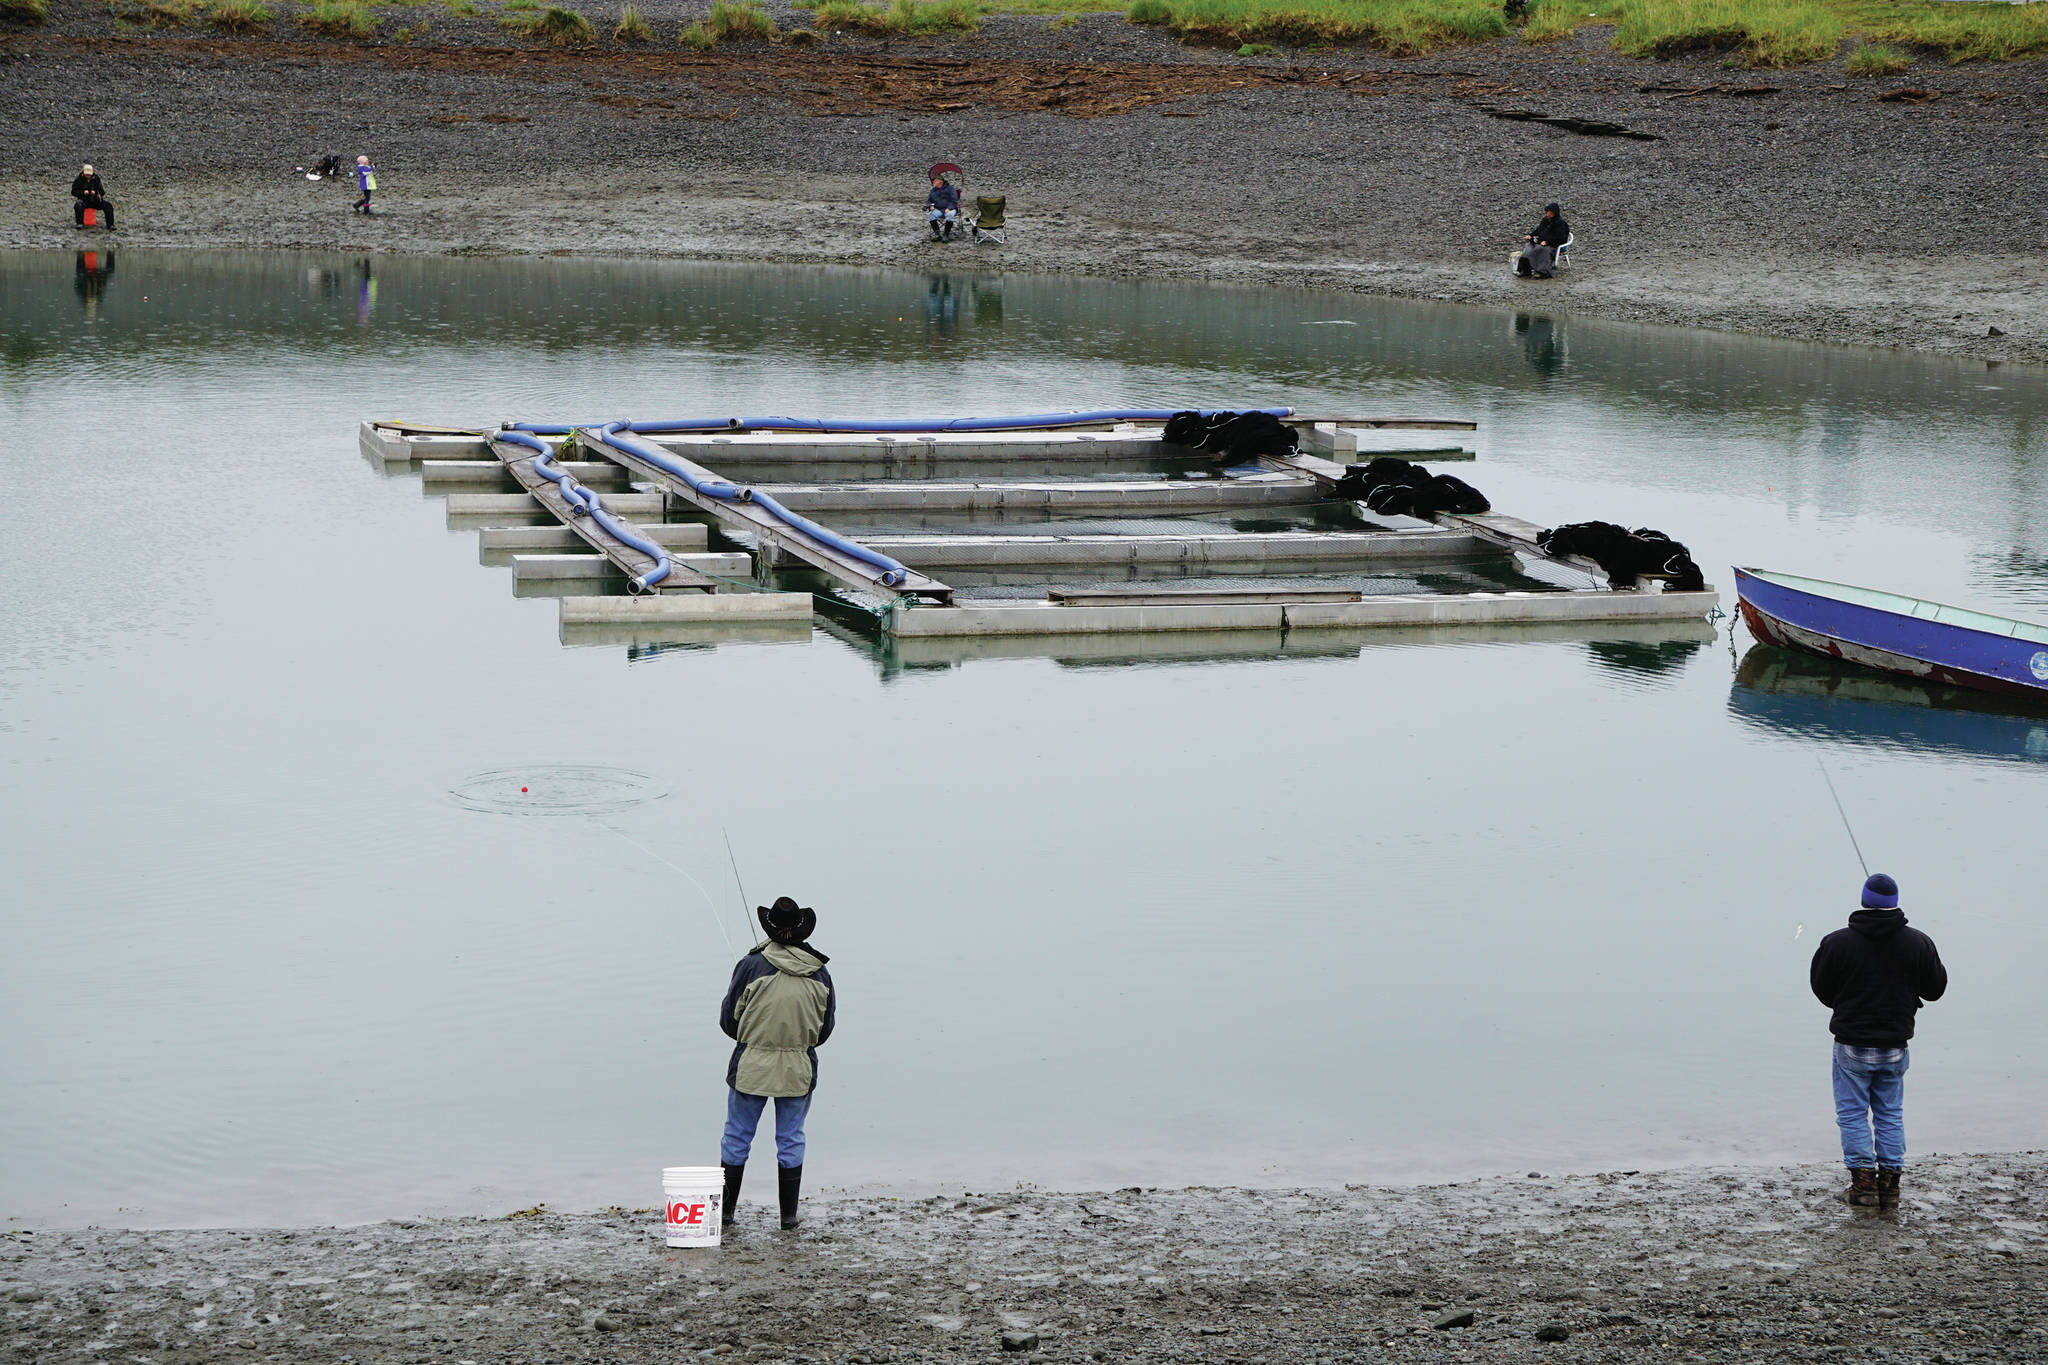 Anglers try their luck at the Nick Dudiak Fishing Lagoon on Saturday, May 29, 2021, on the Homer Spit in Homer, Alaska. The floating pen is for hatchery fish to imprint on the lagoon before being released into Kachemak Bay. (Photo by Michael Armstrong/Homer News0